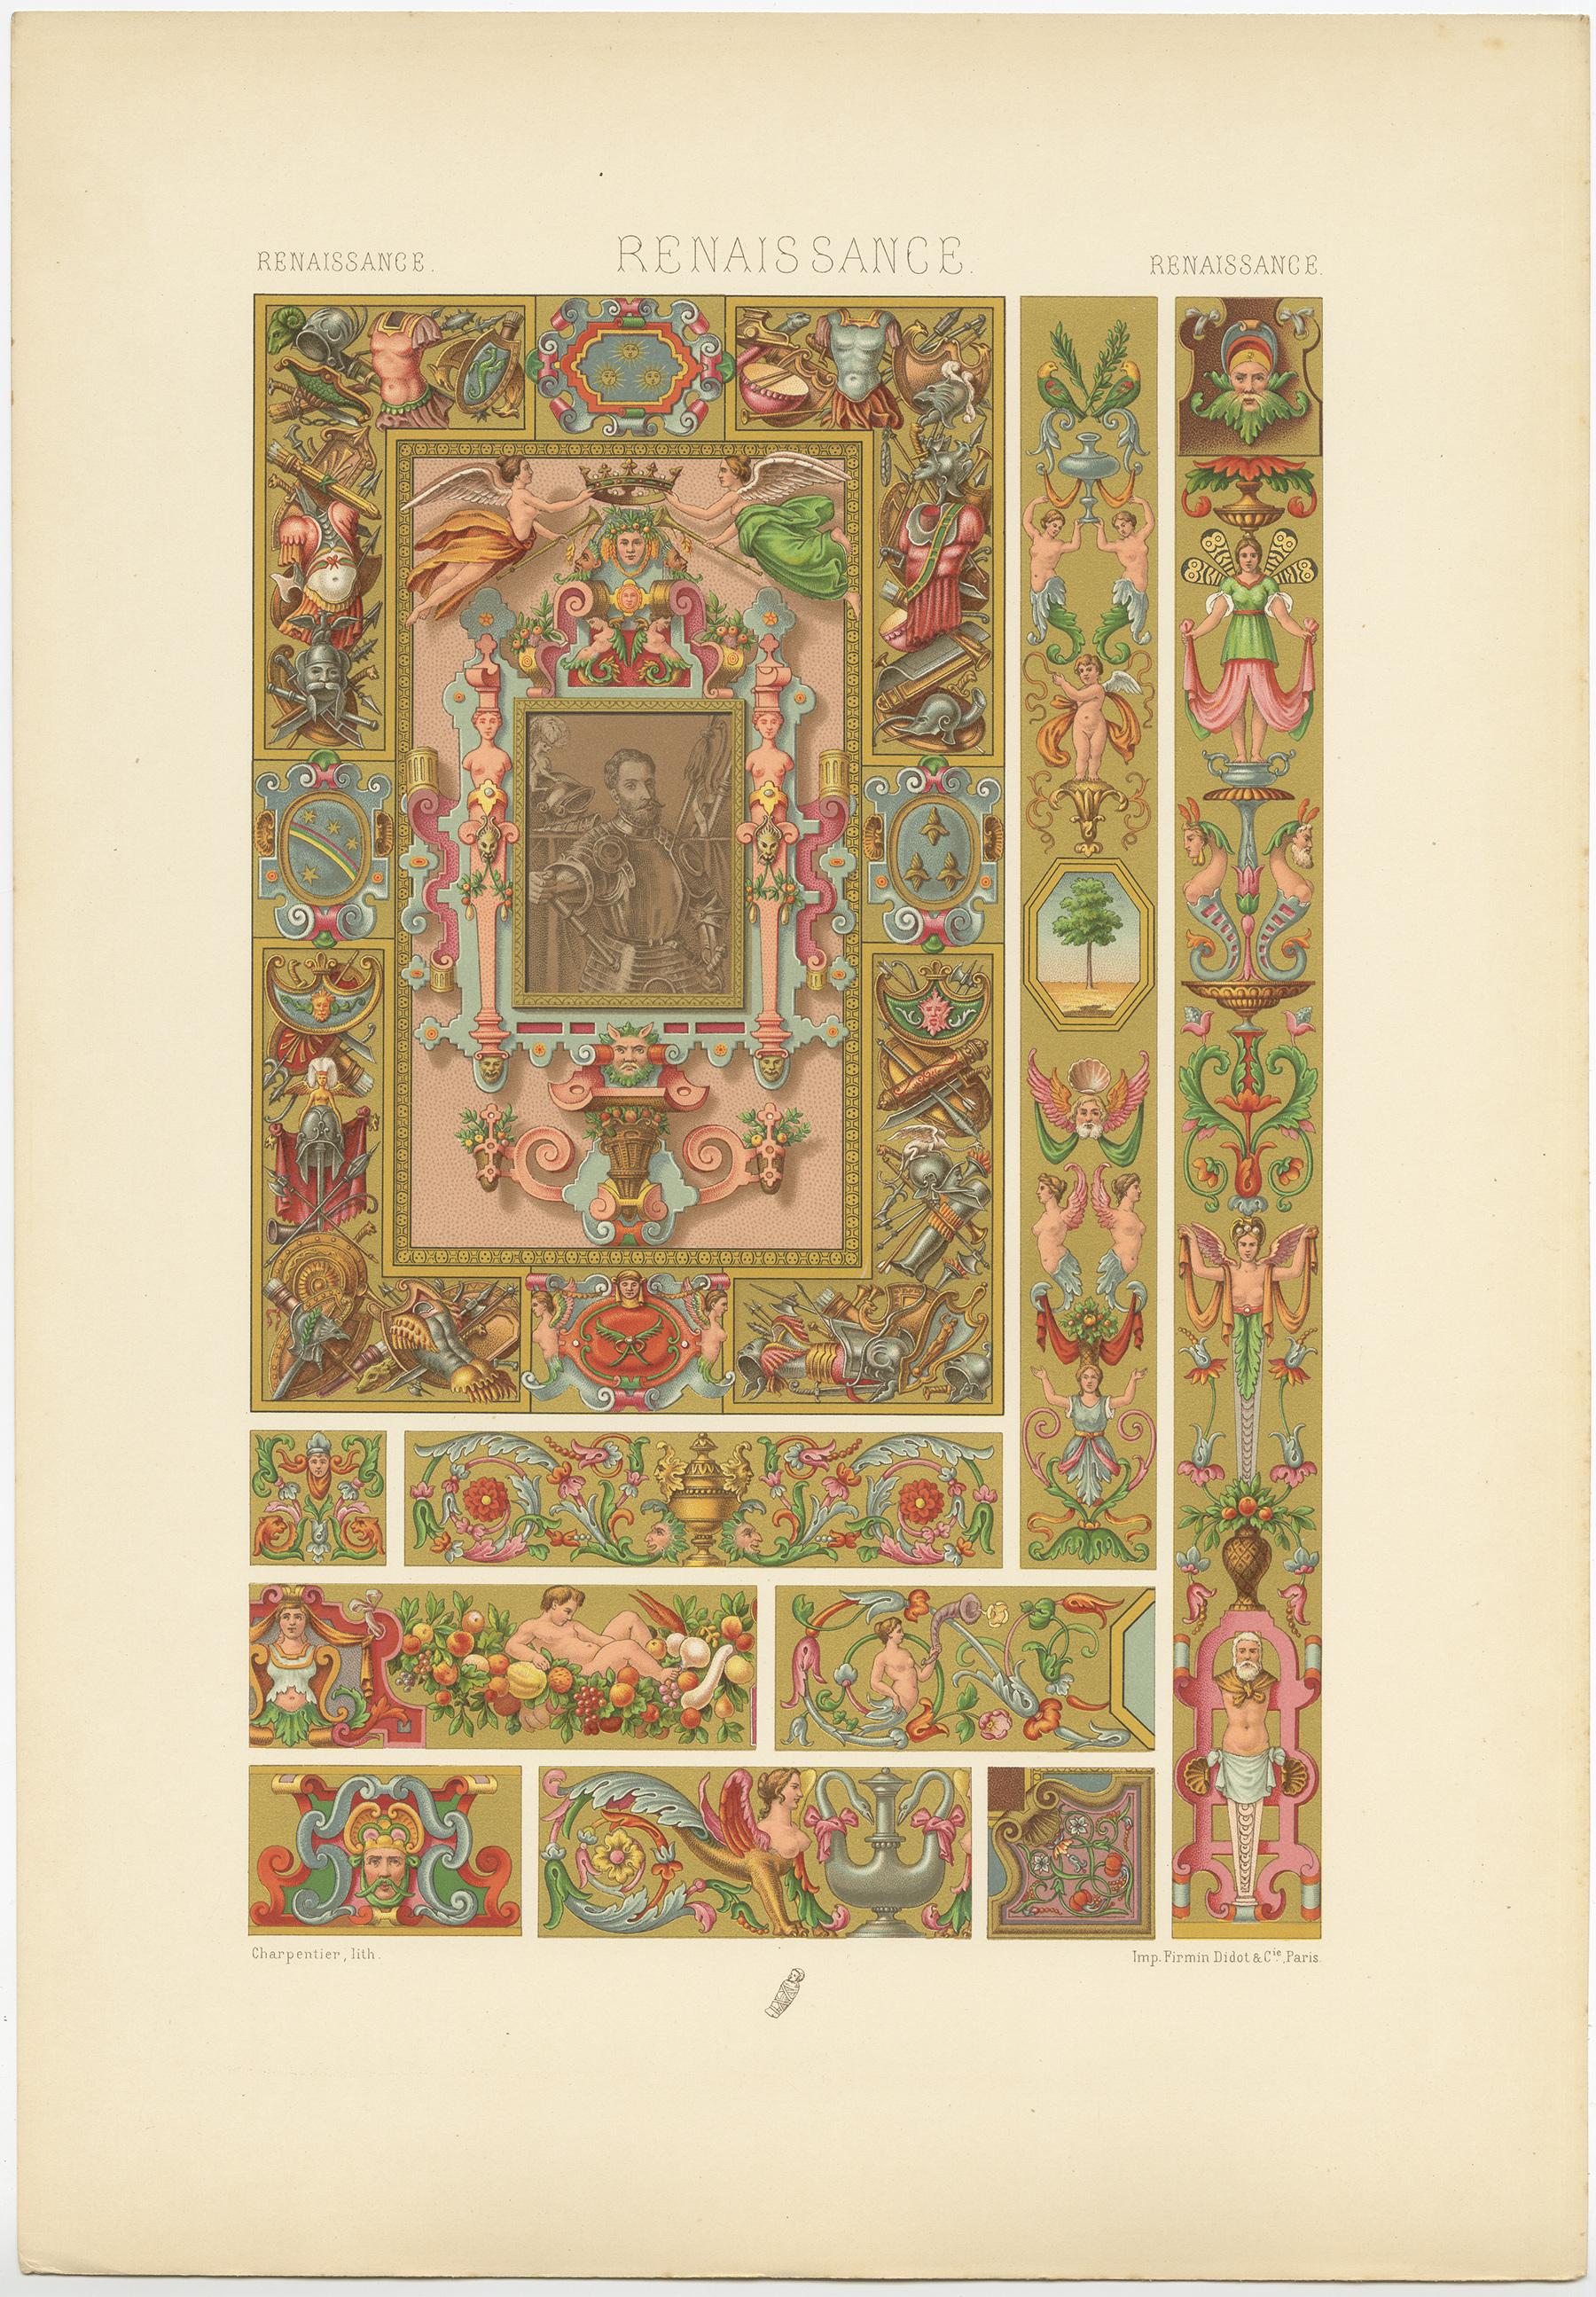 Antique print titled 'Renaissance - Renaissance - Renaissance'. Chromolithograph of carved-wood motifs from a 16th century Italian manuscripts ornaments. This print originates from 'l'Ornement Polychrome' by Auguste Racinet. Published circa 1890.